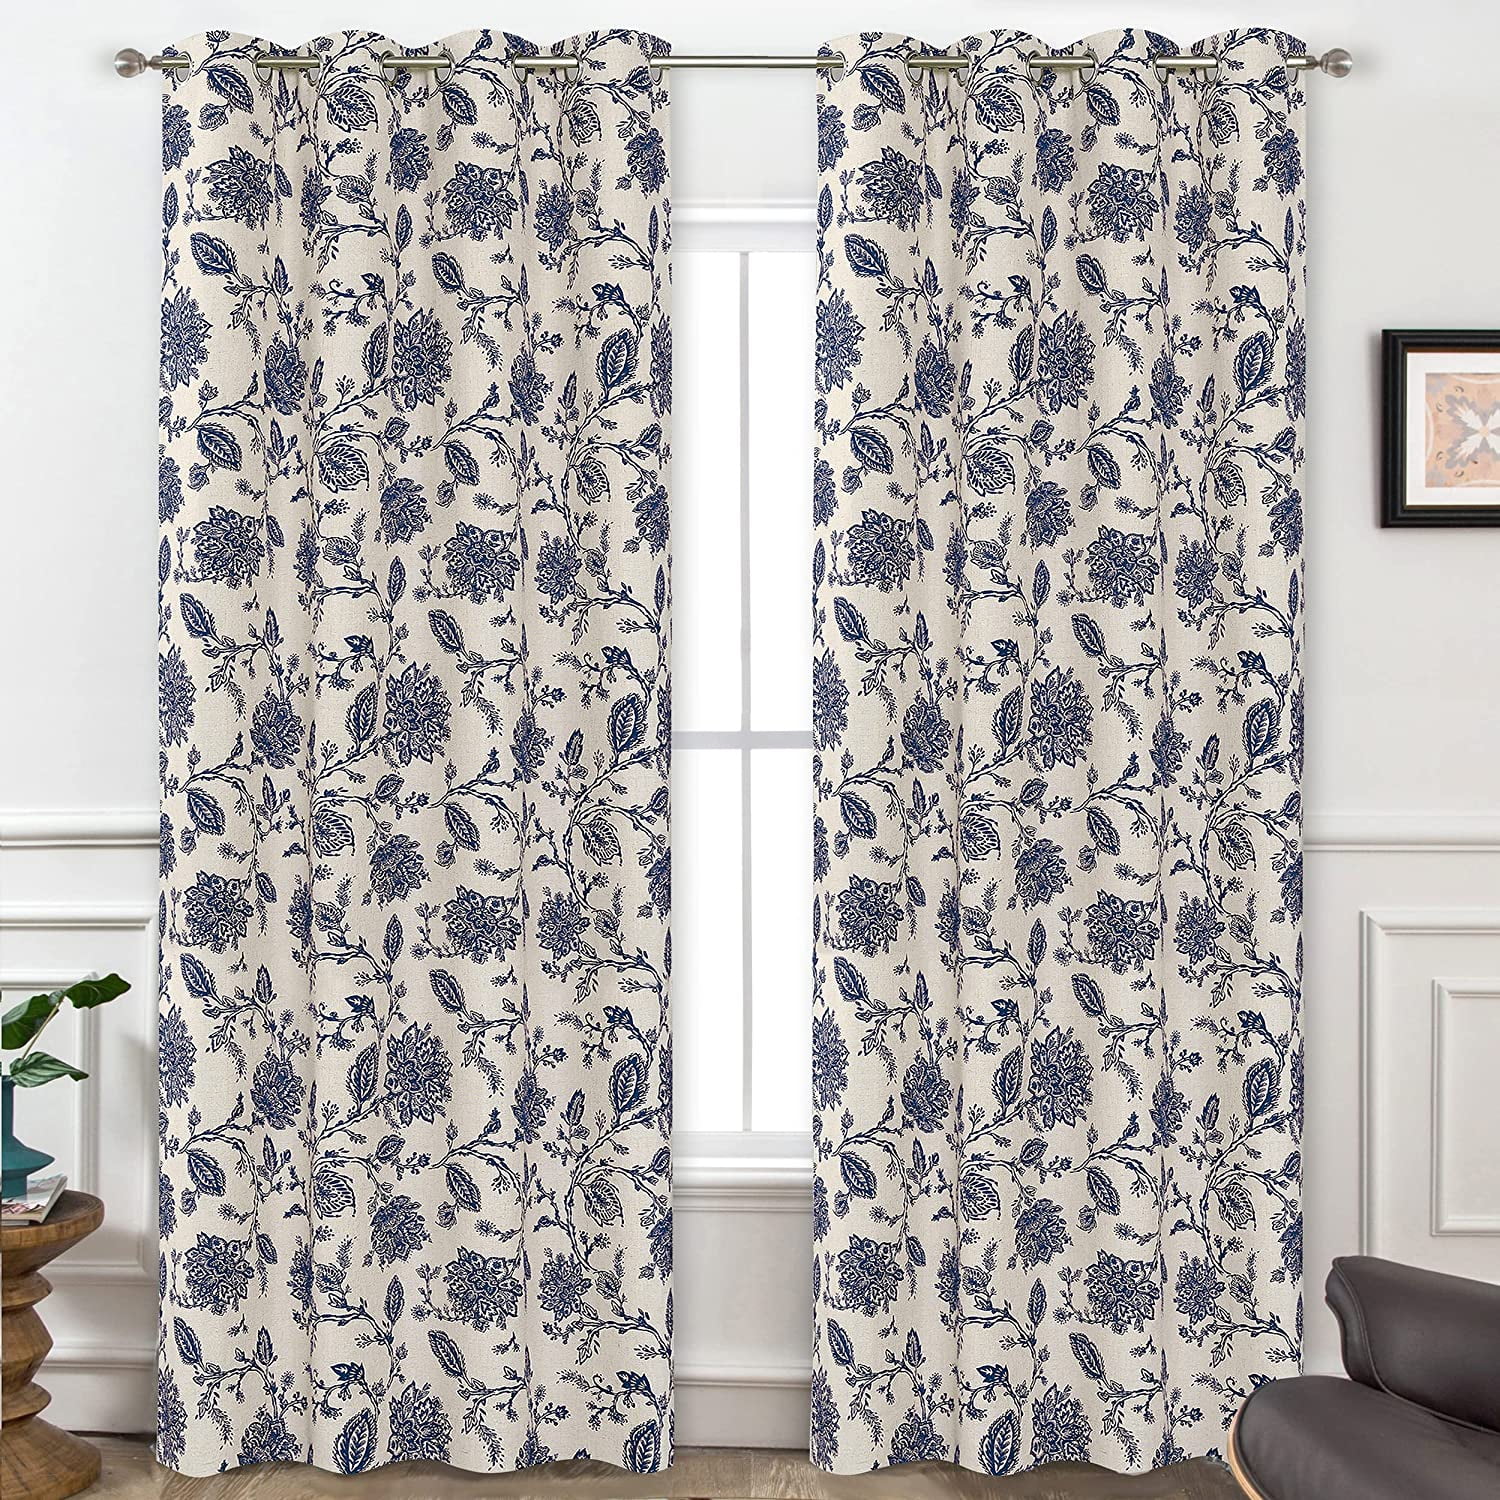 Mellanni Blackout Curtains 2-Panel 52"x63" Thermal Insulated w/ Siver Grommets 